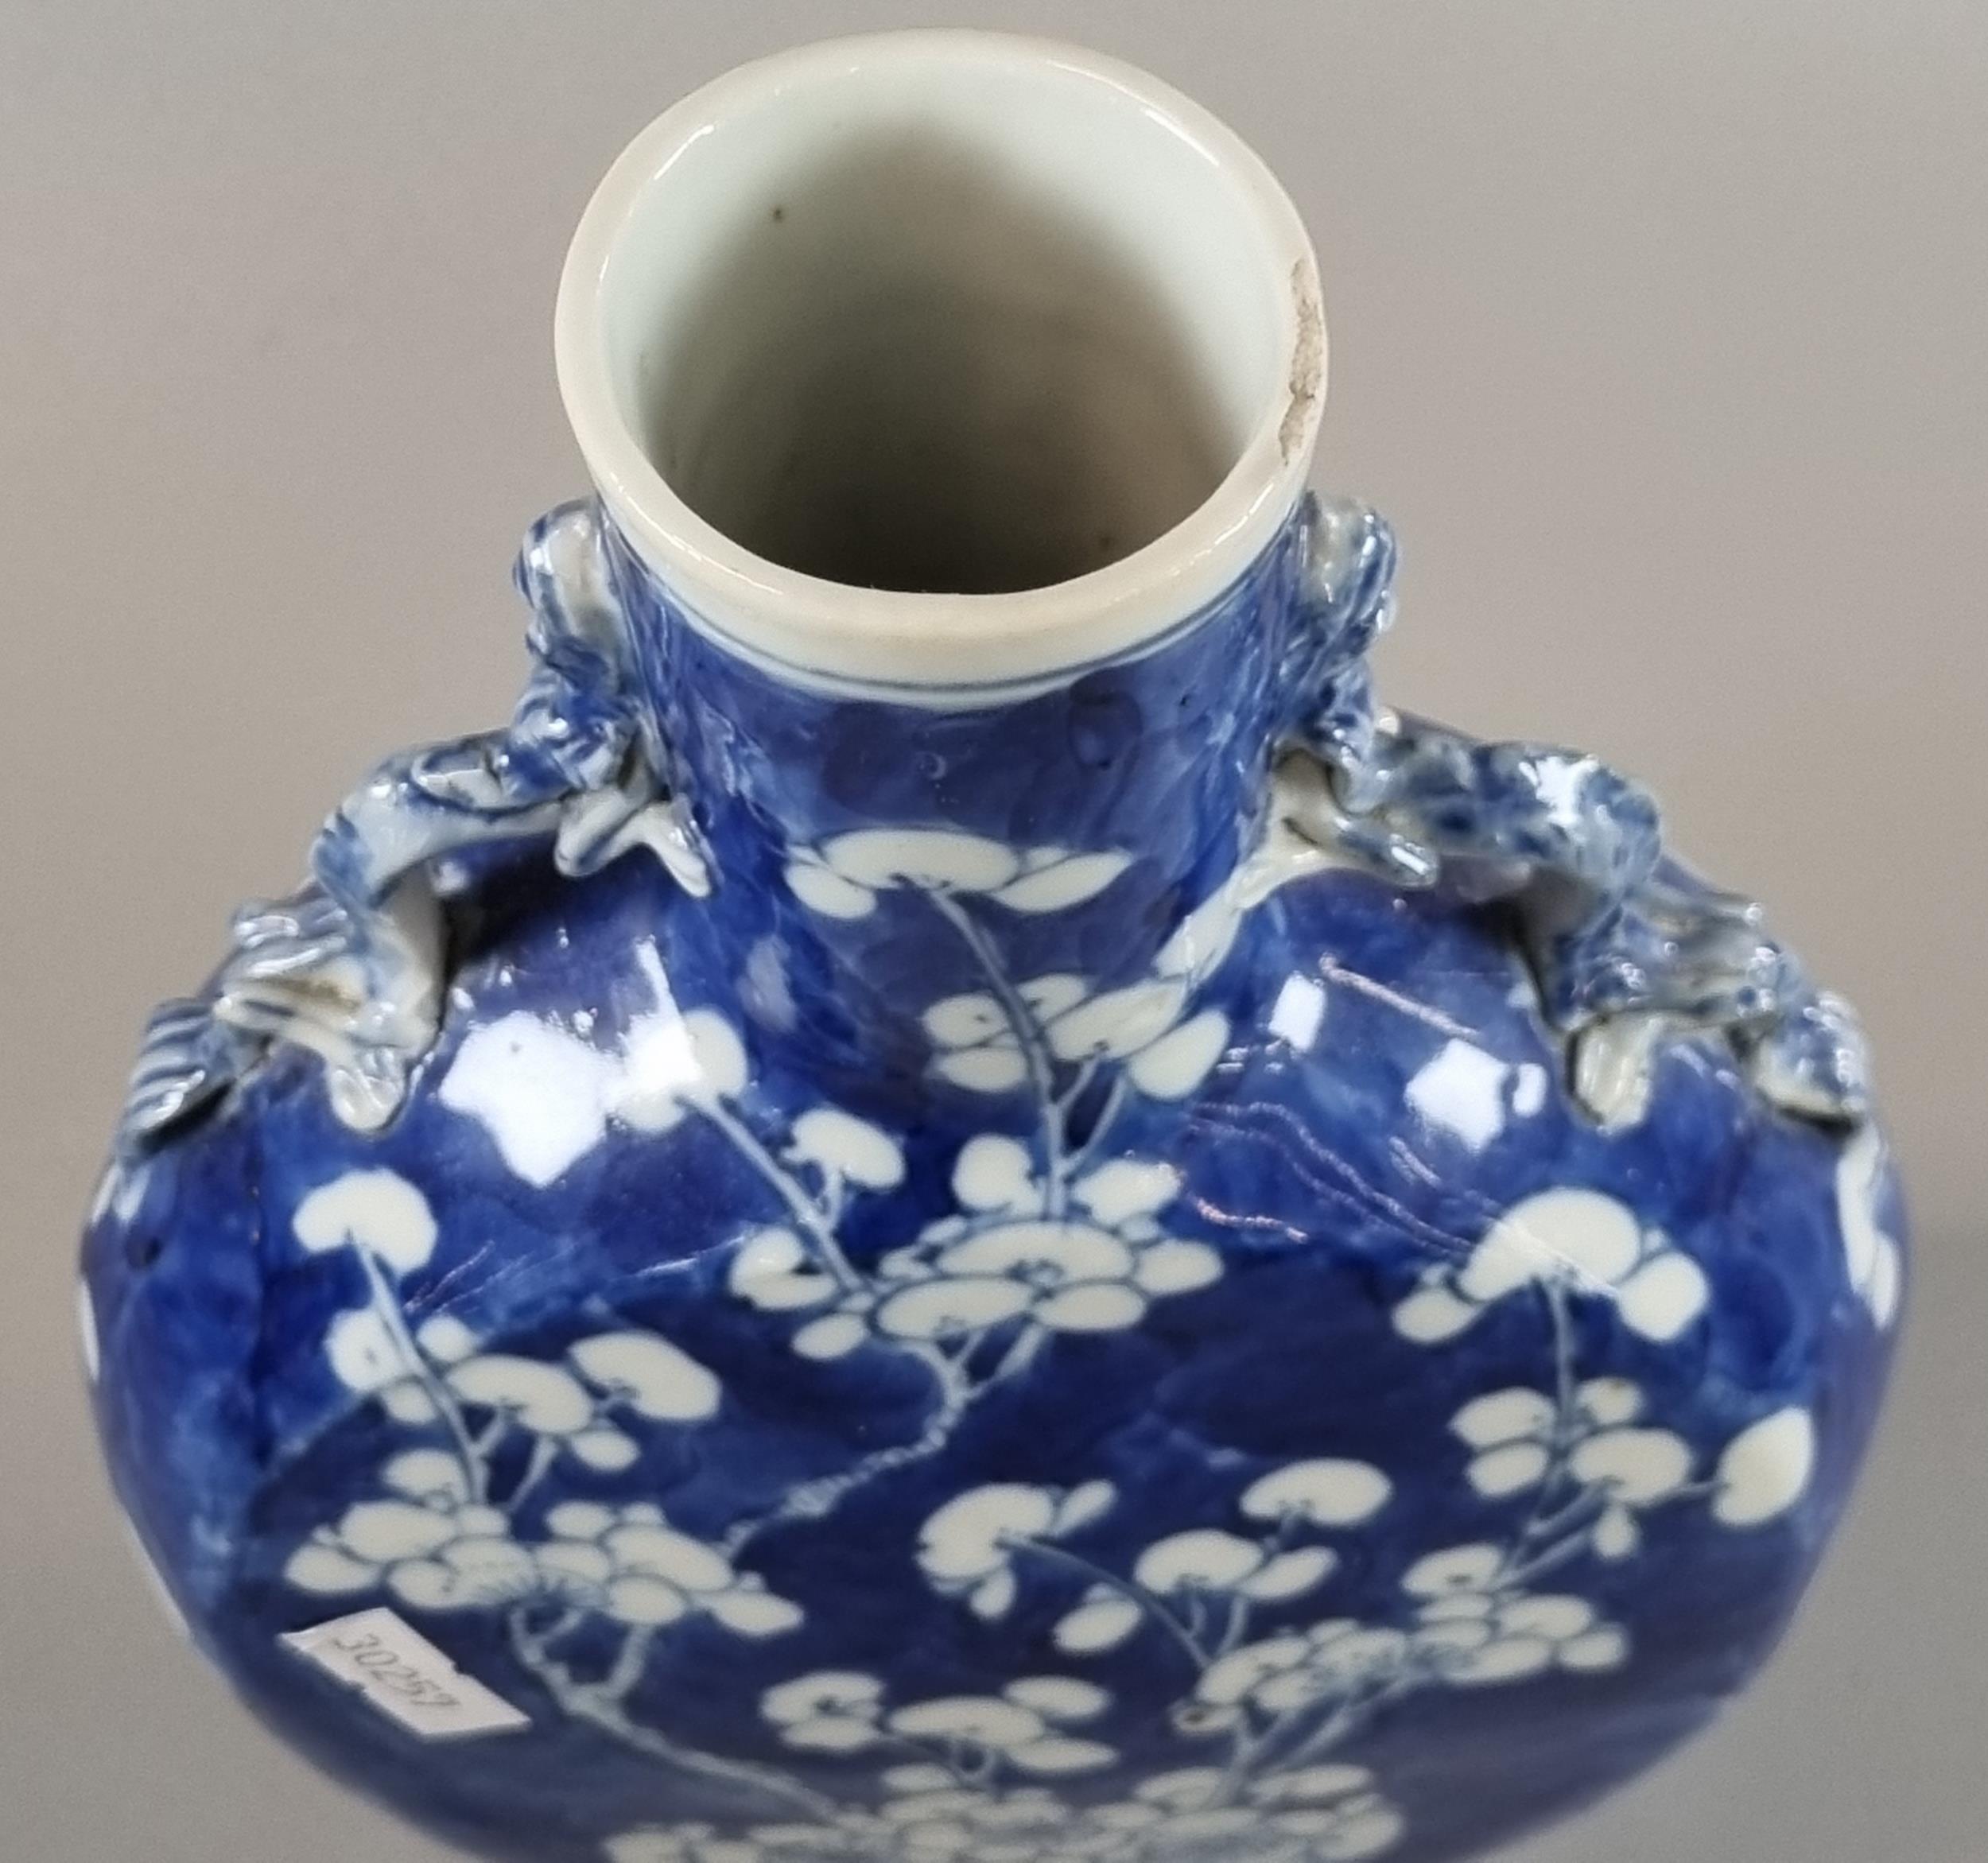 19th century Chinese export porcelain blue and white moon flask, depicting flower and prunus - Image 4 of 12